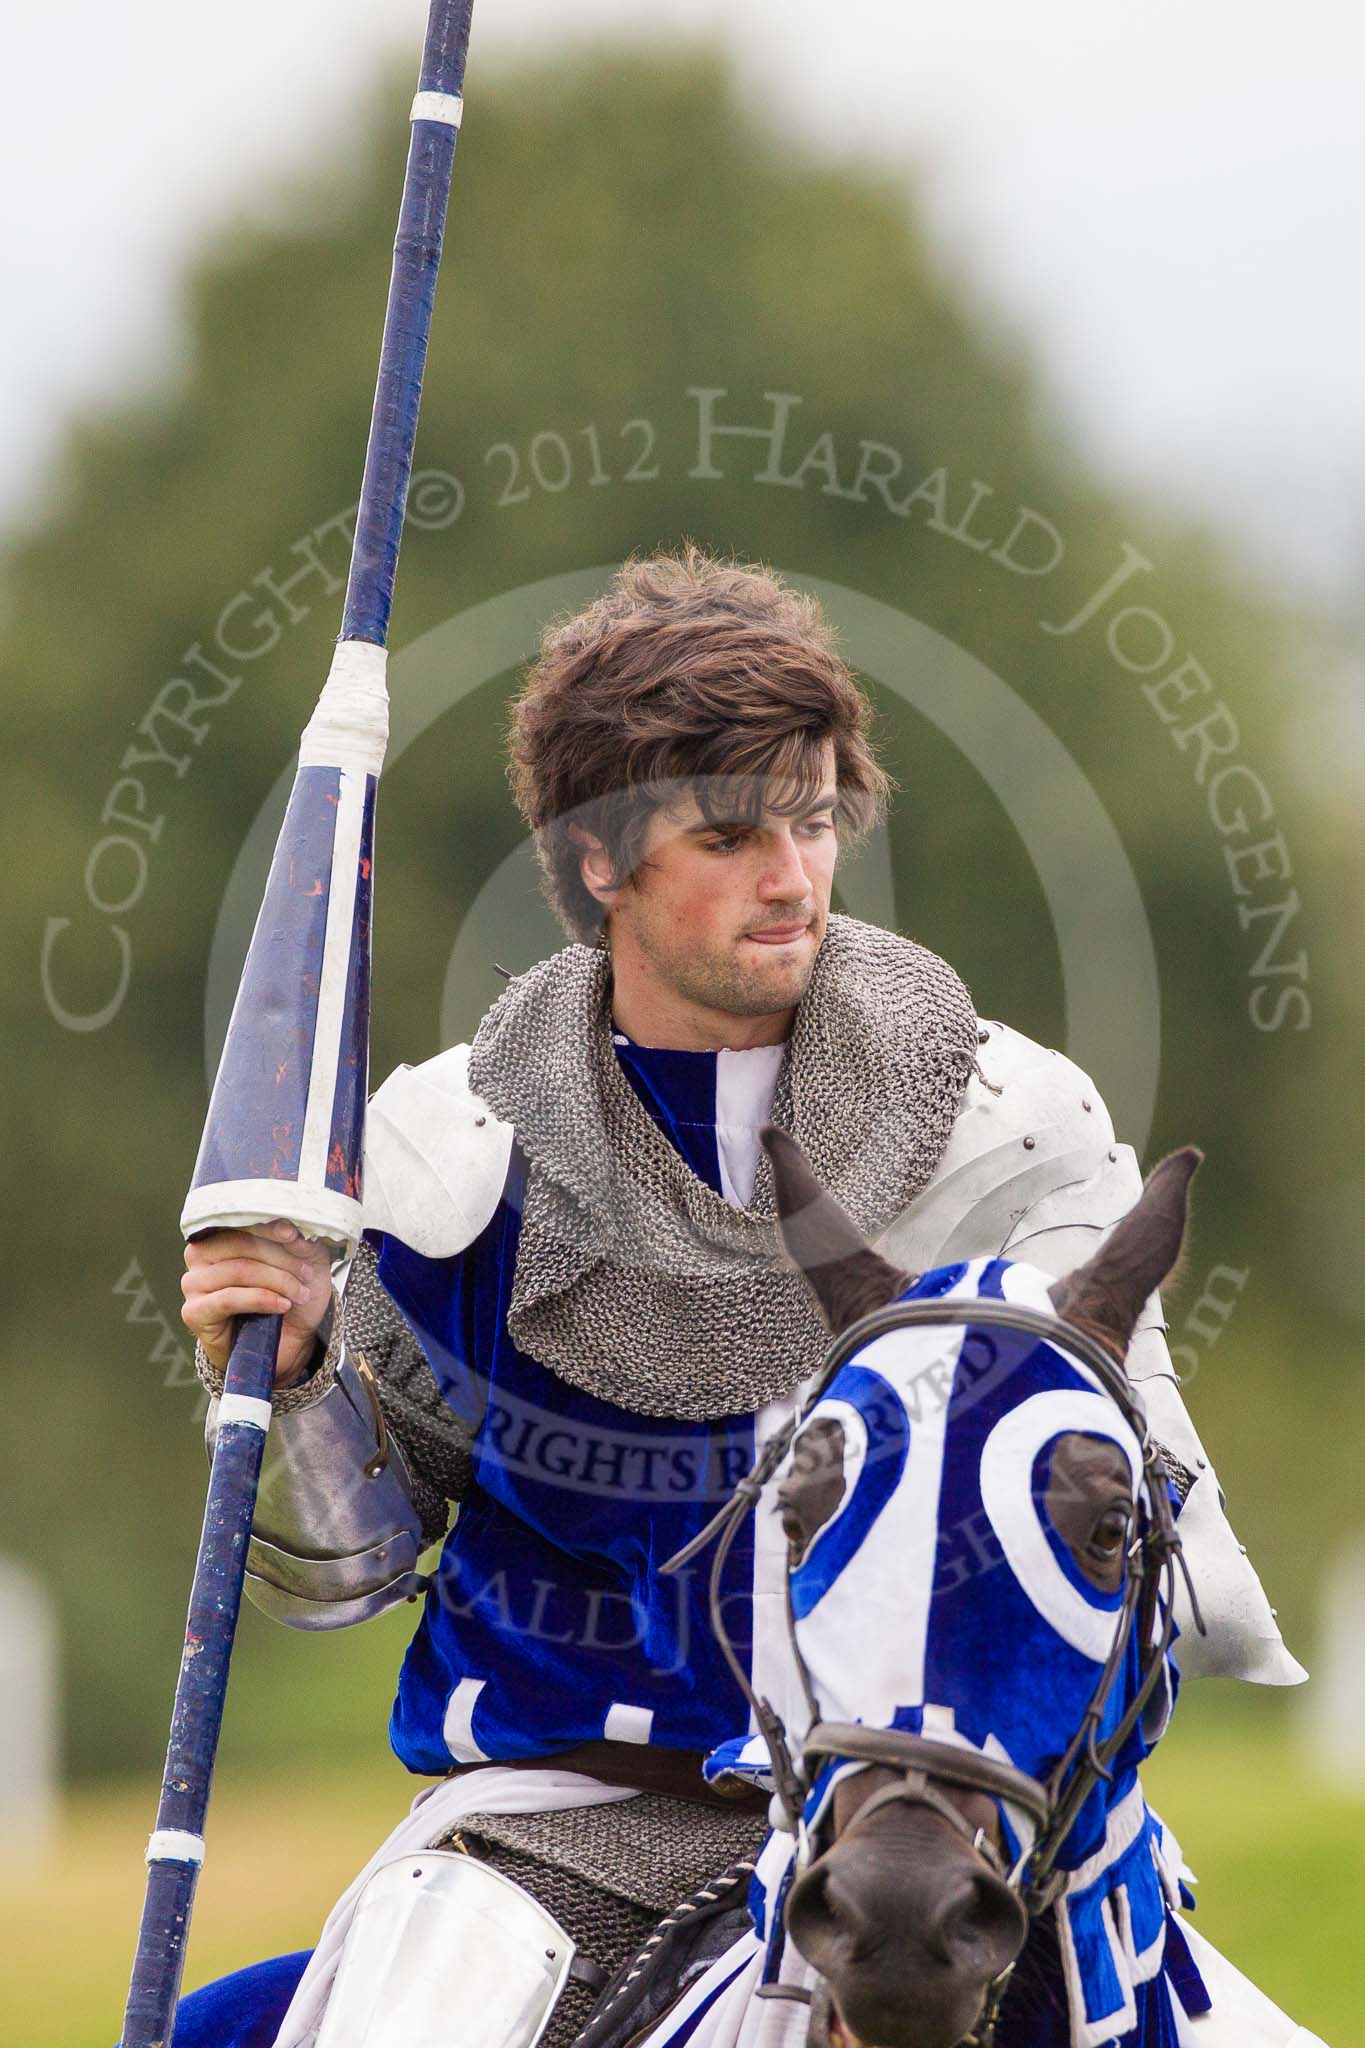 DBPC Polo in the Park 2012: The Knights of Middle England and their Jousting display..
Dallas Burston Polo Club,
Stoneythorpe Estate,
Southam,
Warwickshire,
United Kingdom,
on 16 September 2012 at 14:21, image #185